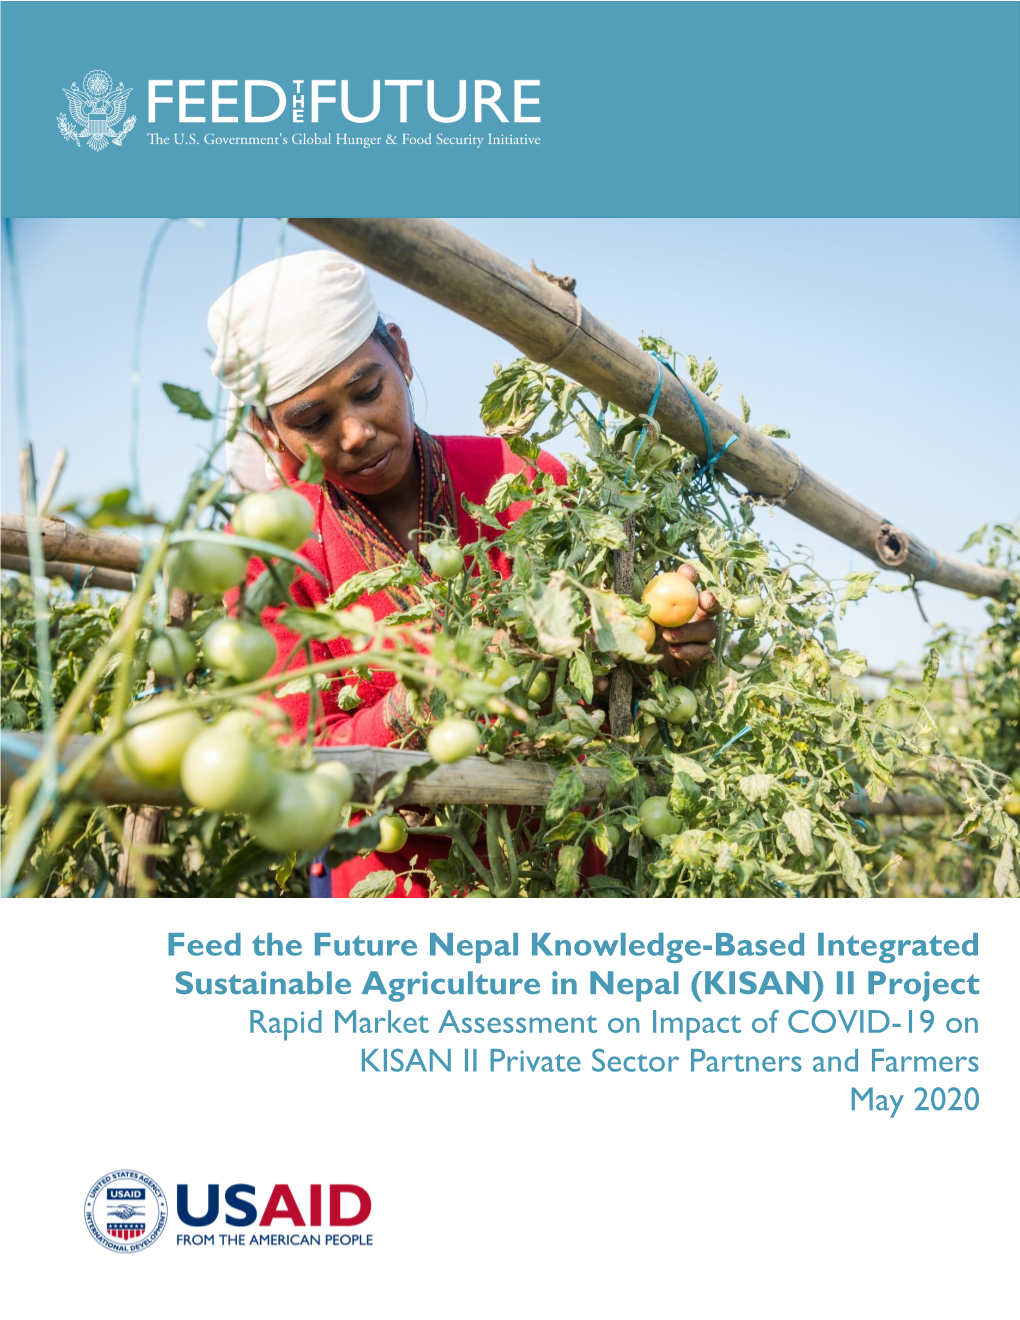 (KISAN) II Project Rapid Market Assessment on Impact of COVID-19 on KISAN II Private Sector Partners and Farmers May 2020